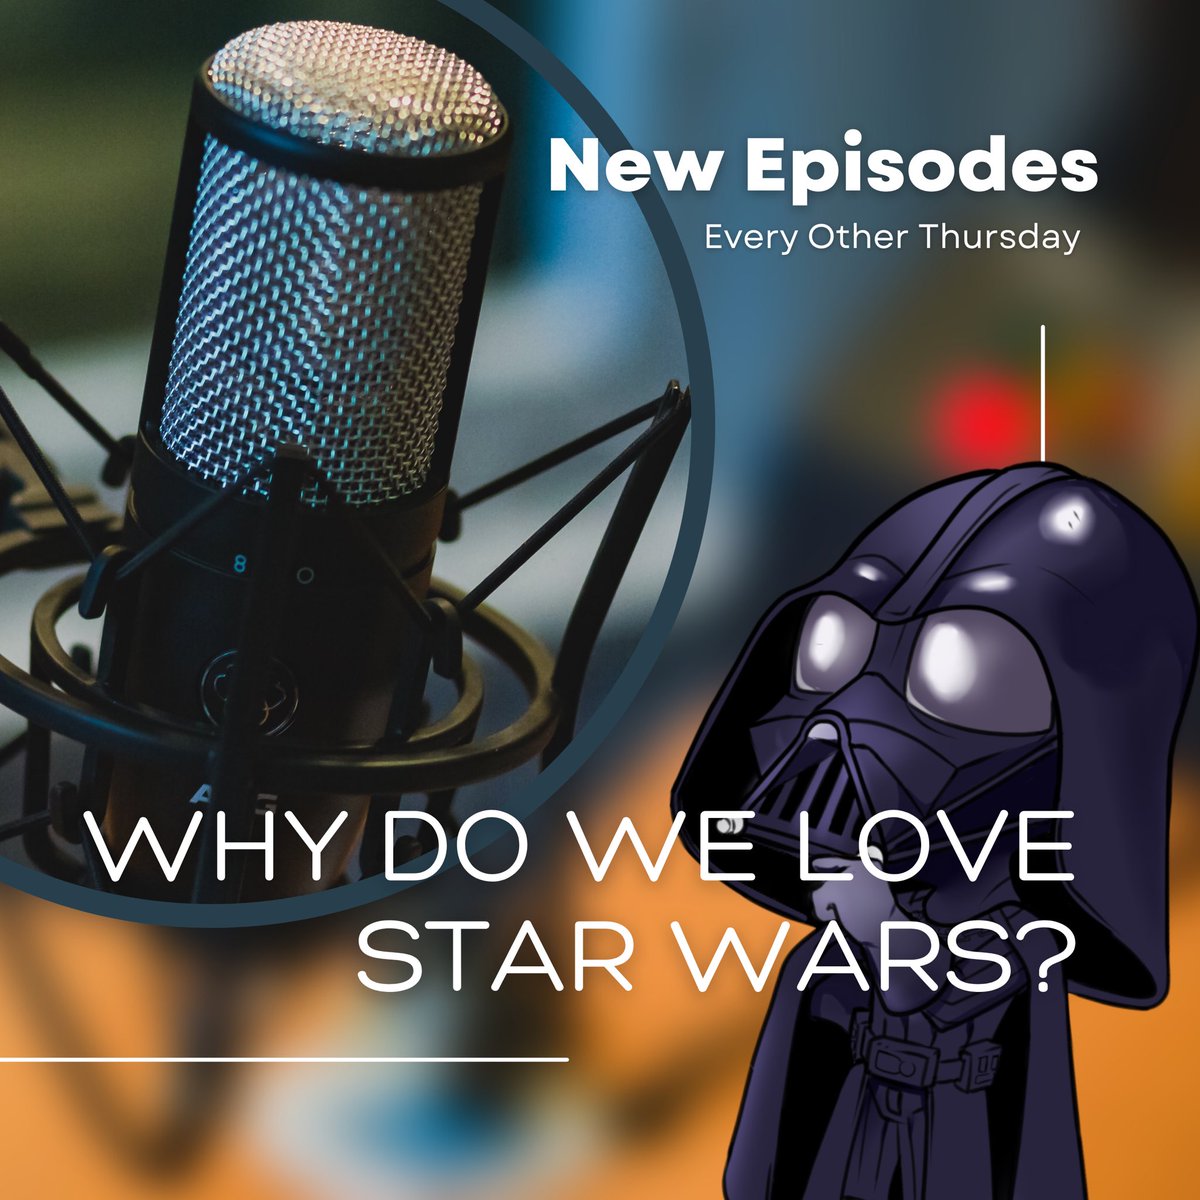 So proud of this podcast. We know #StarWarsFans will ❤️ it. 🎧 We think big fans like @ThatKevinSmith , @Lin_Manuel , @mradamscott , and THE OG - @MarkHamill will dig how we use science & spirit to investigate. Listen, please? #starwars #starwarspodcast #whydowelovestarwars